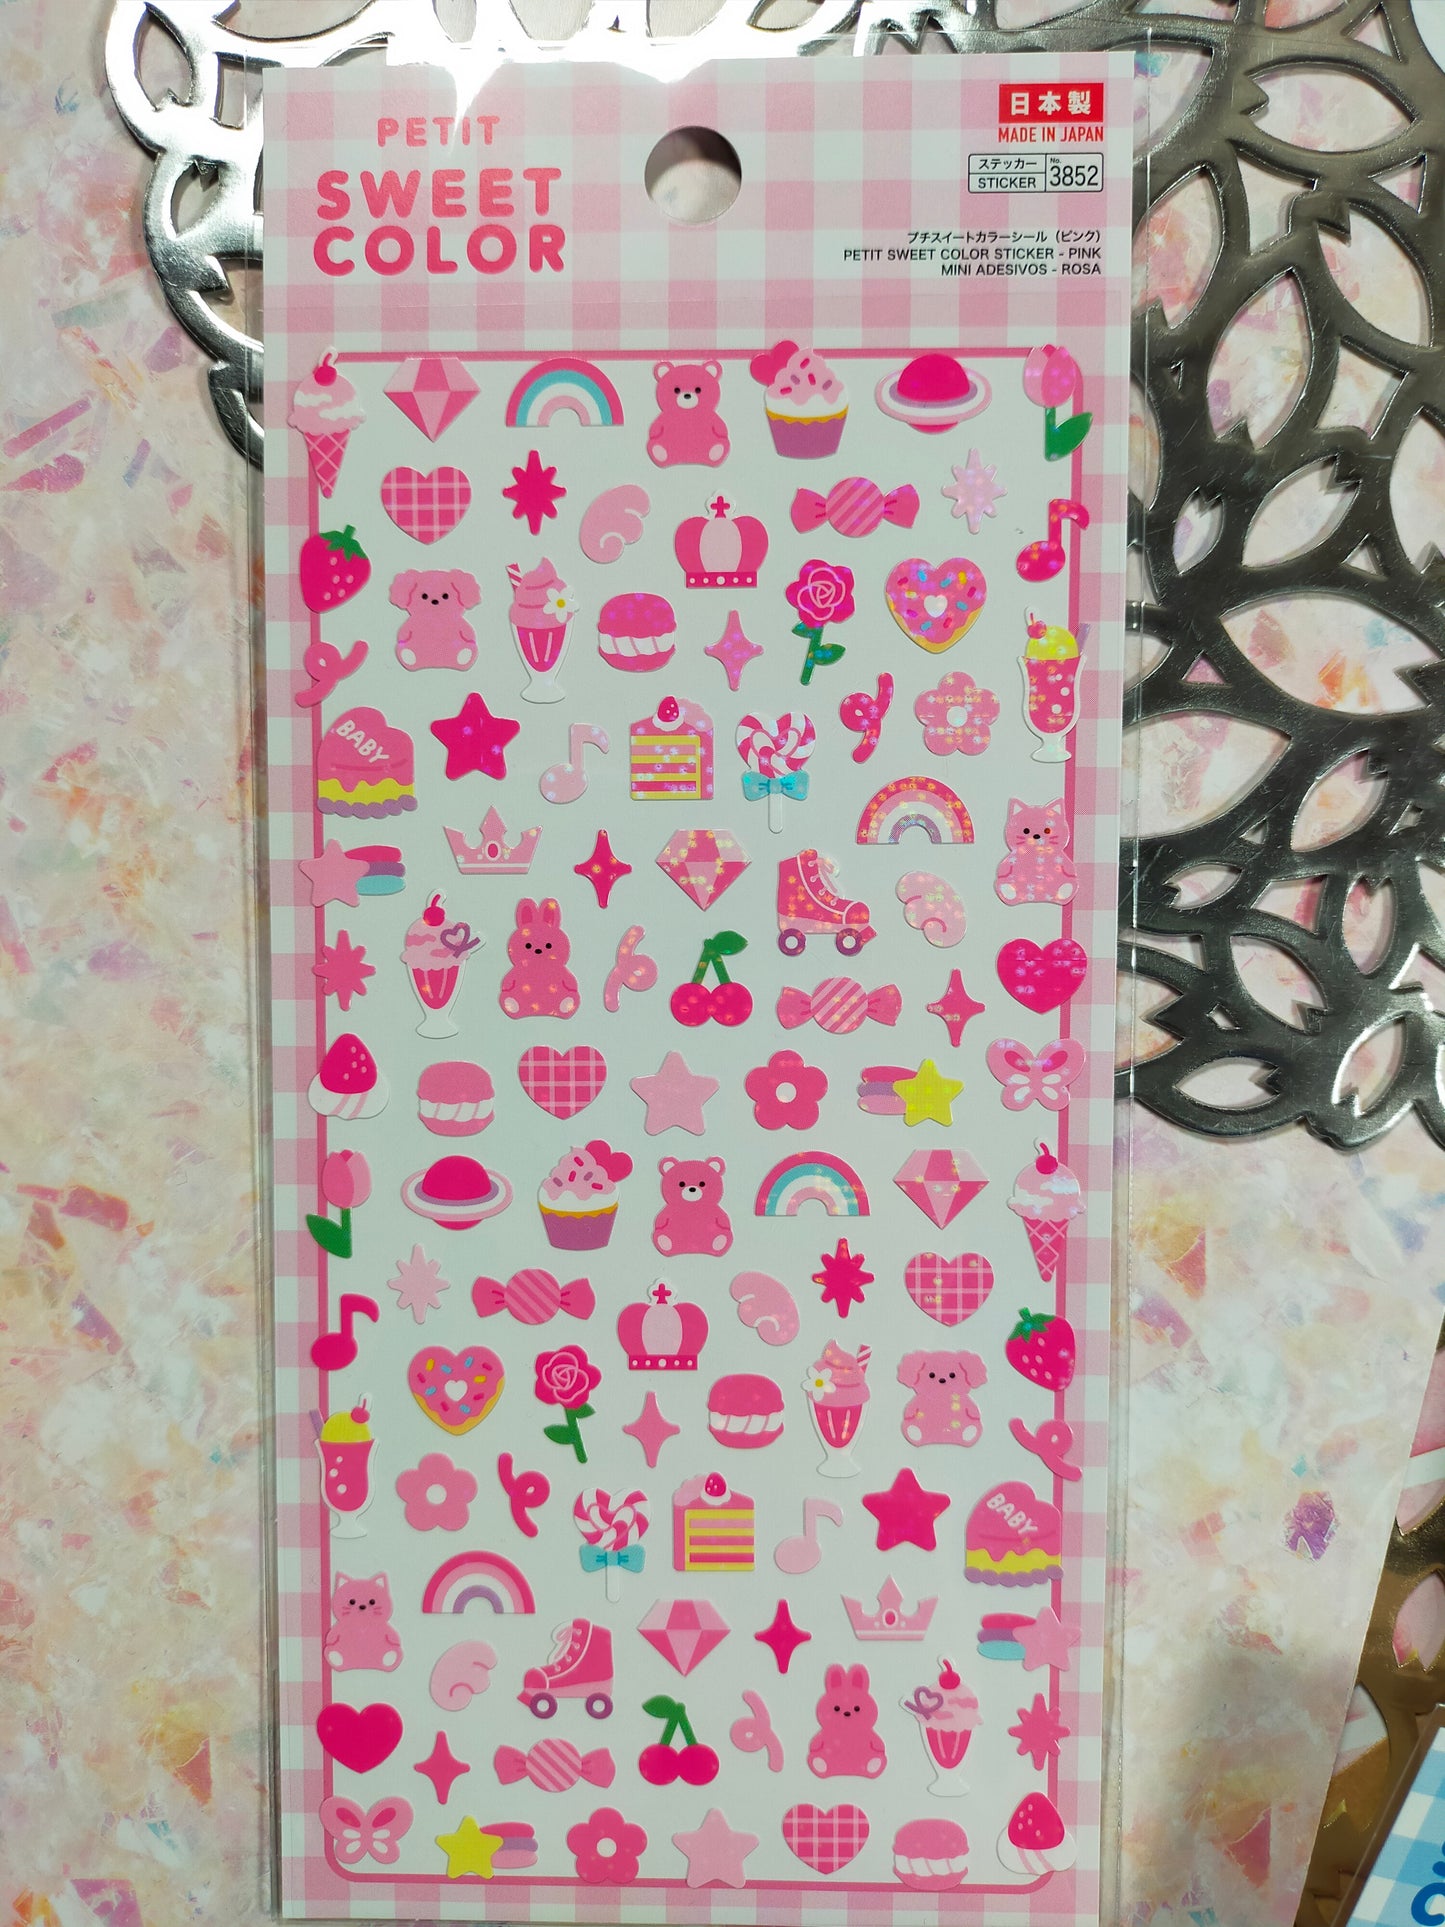 Petit sweet color stickers ,daiso _ Red / Pink / Orange / Yellow / Green / Blue / Purple / white / Black